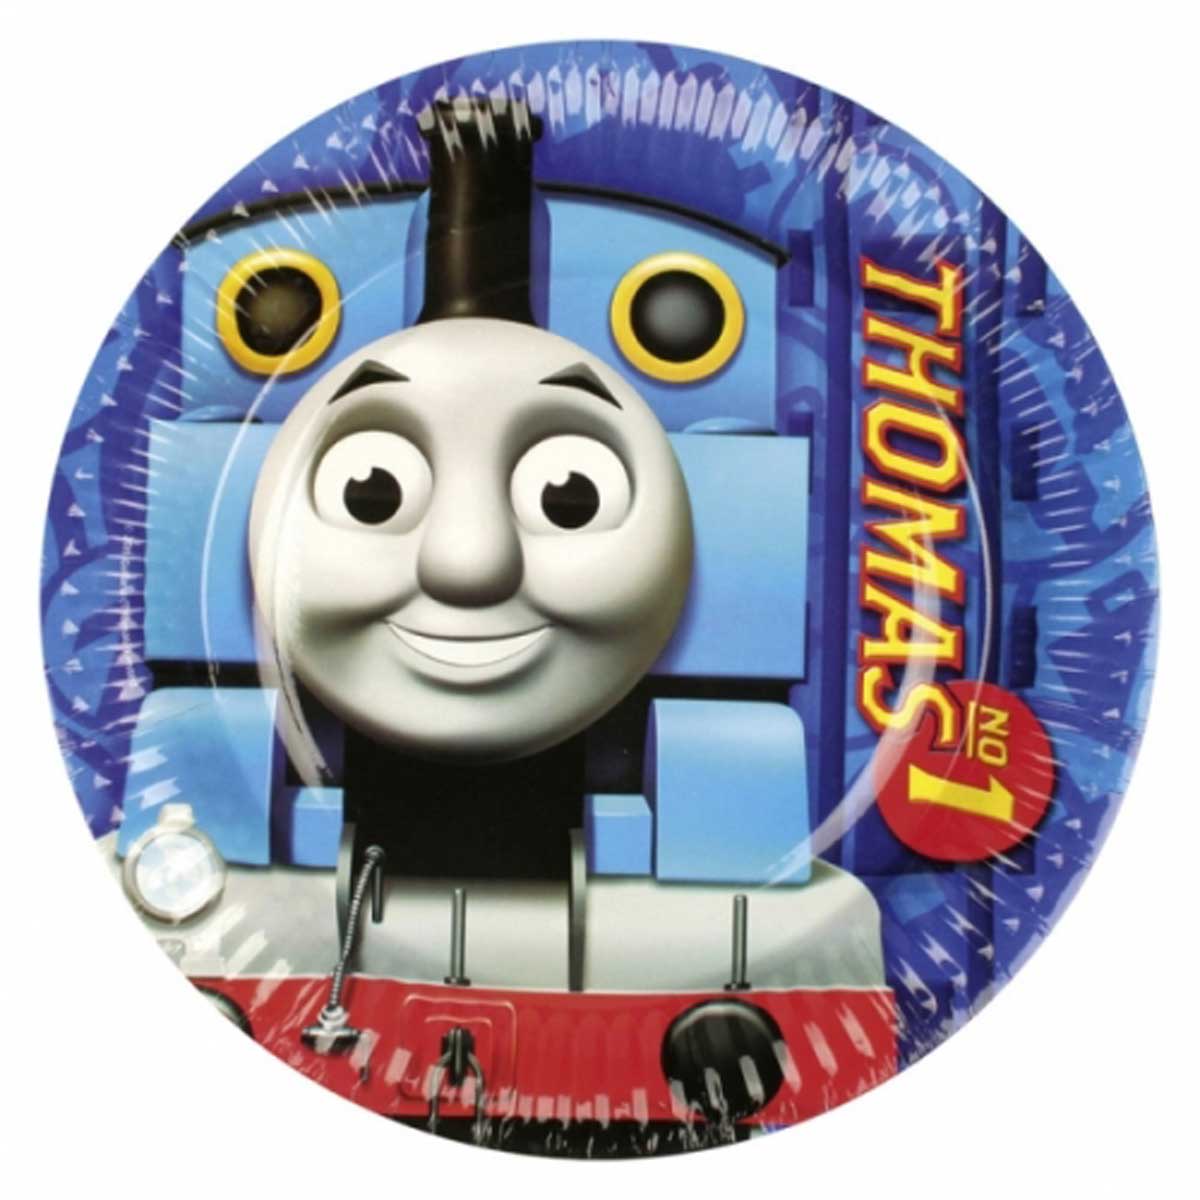 Thomas And Friends Plates 9in, 8pcs Printed Tableware - Party Centre